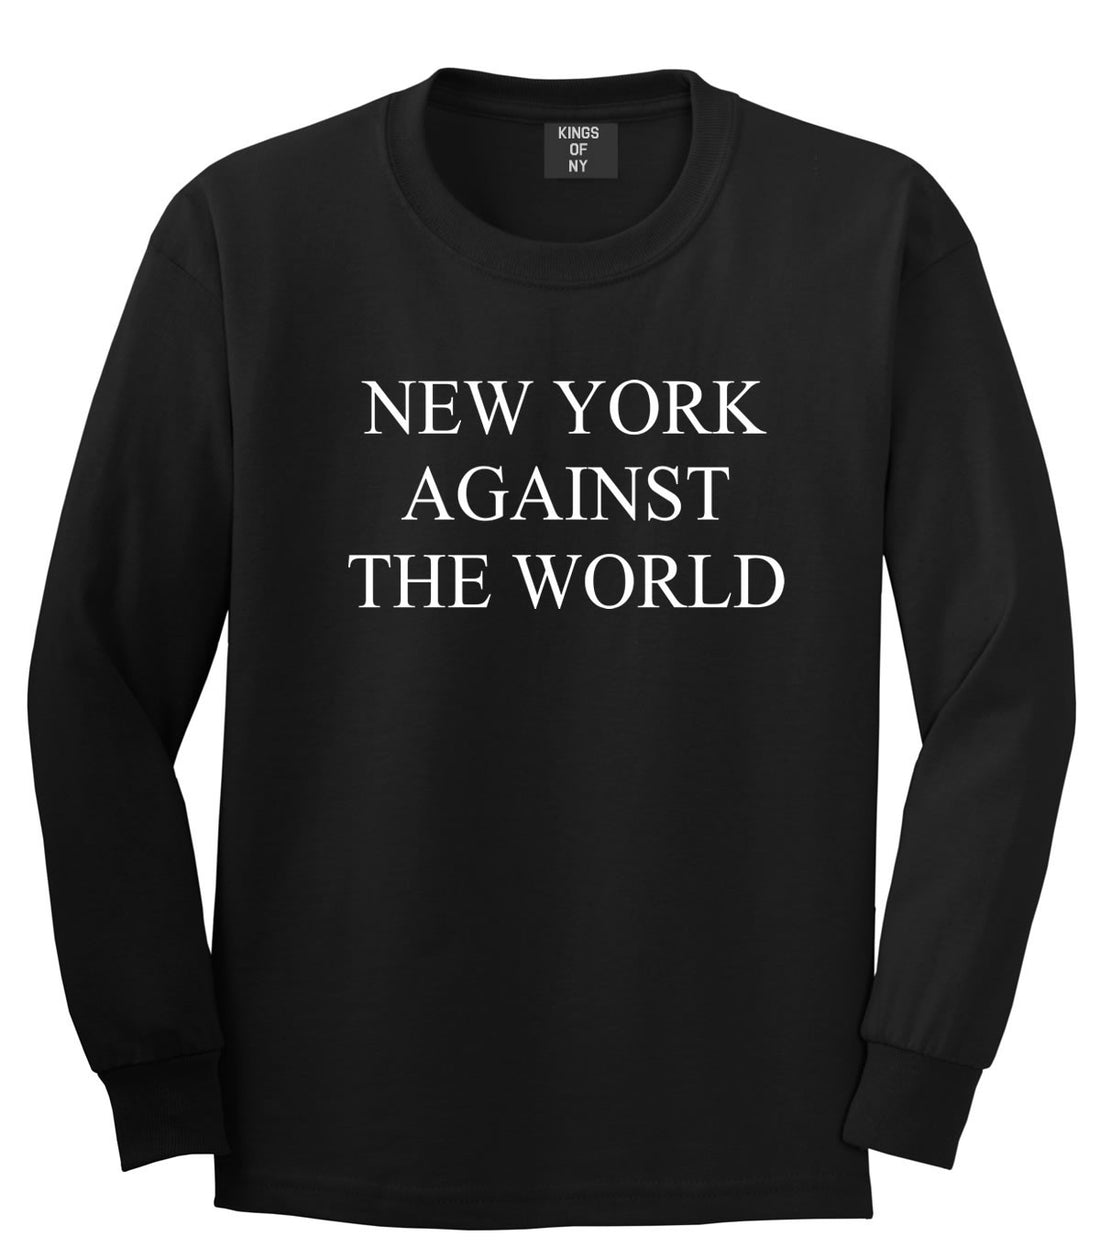 New York Against The World Long Sleeve T-Shirt in Black by Kings Of NY